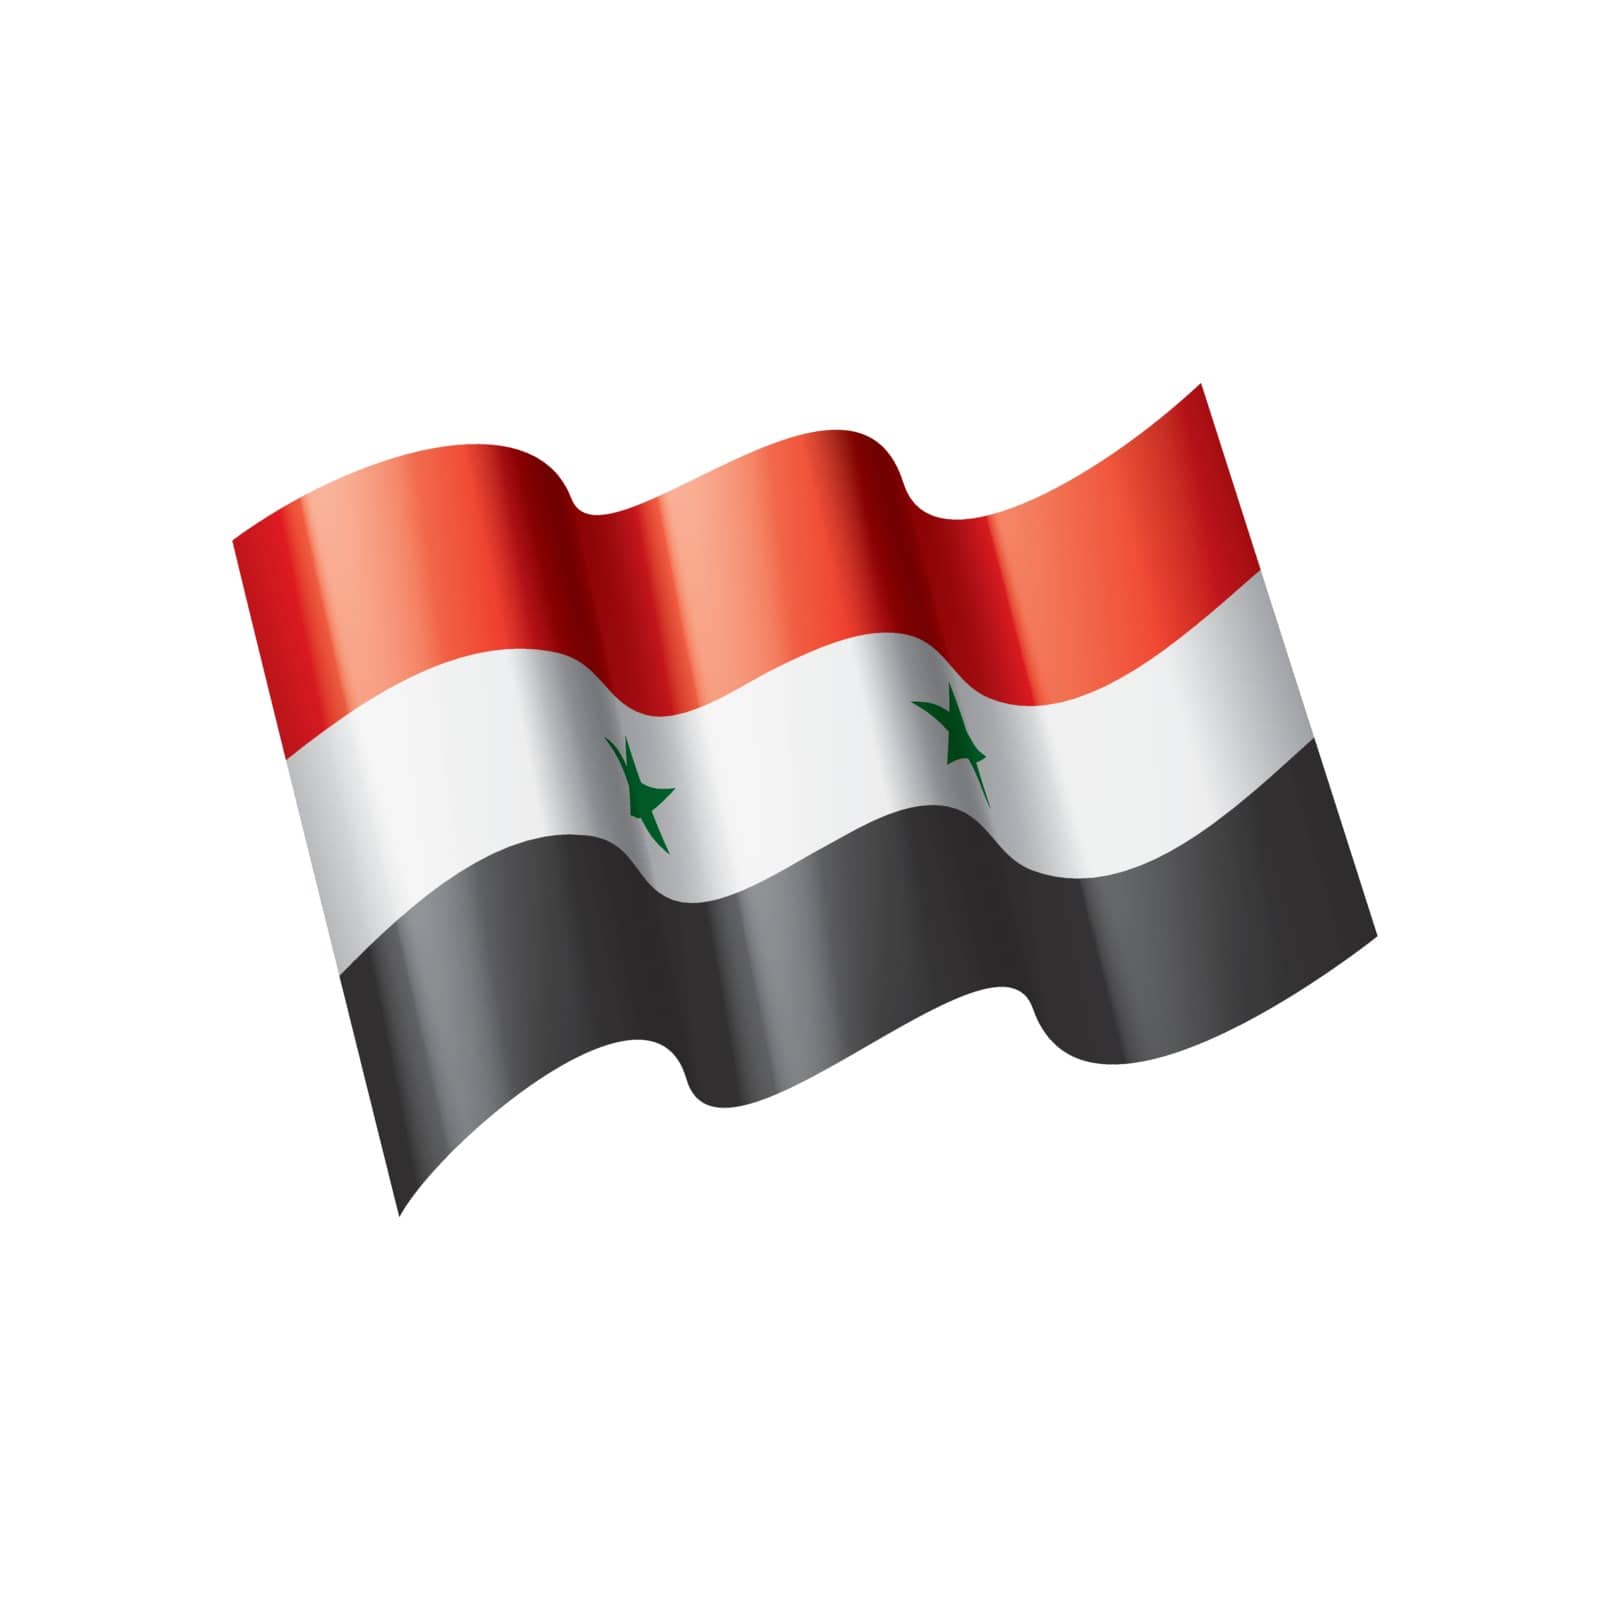 Syria flag, vector illustration on a white background by butenkow